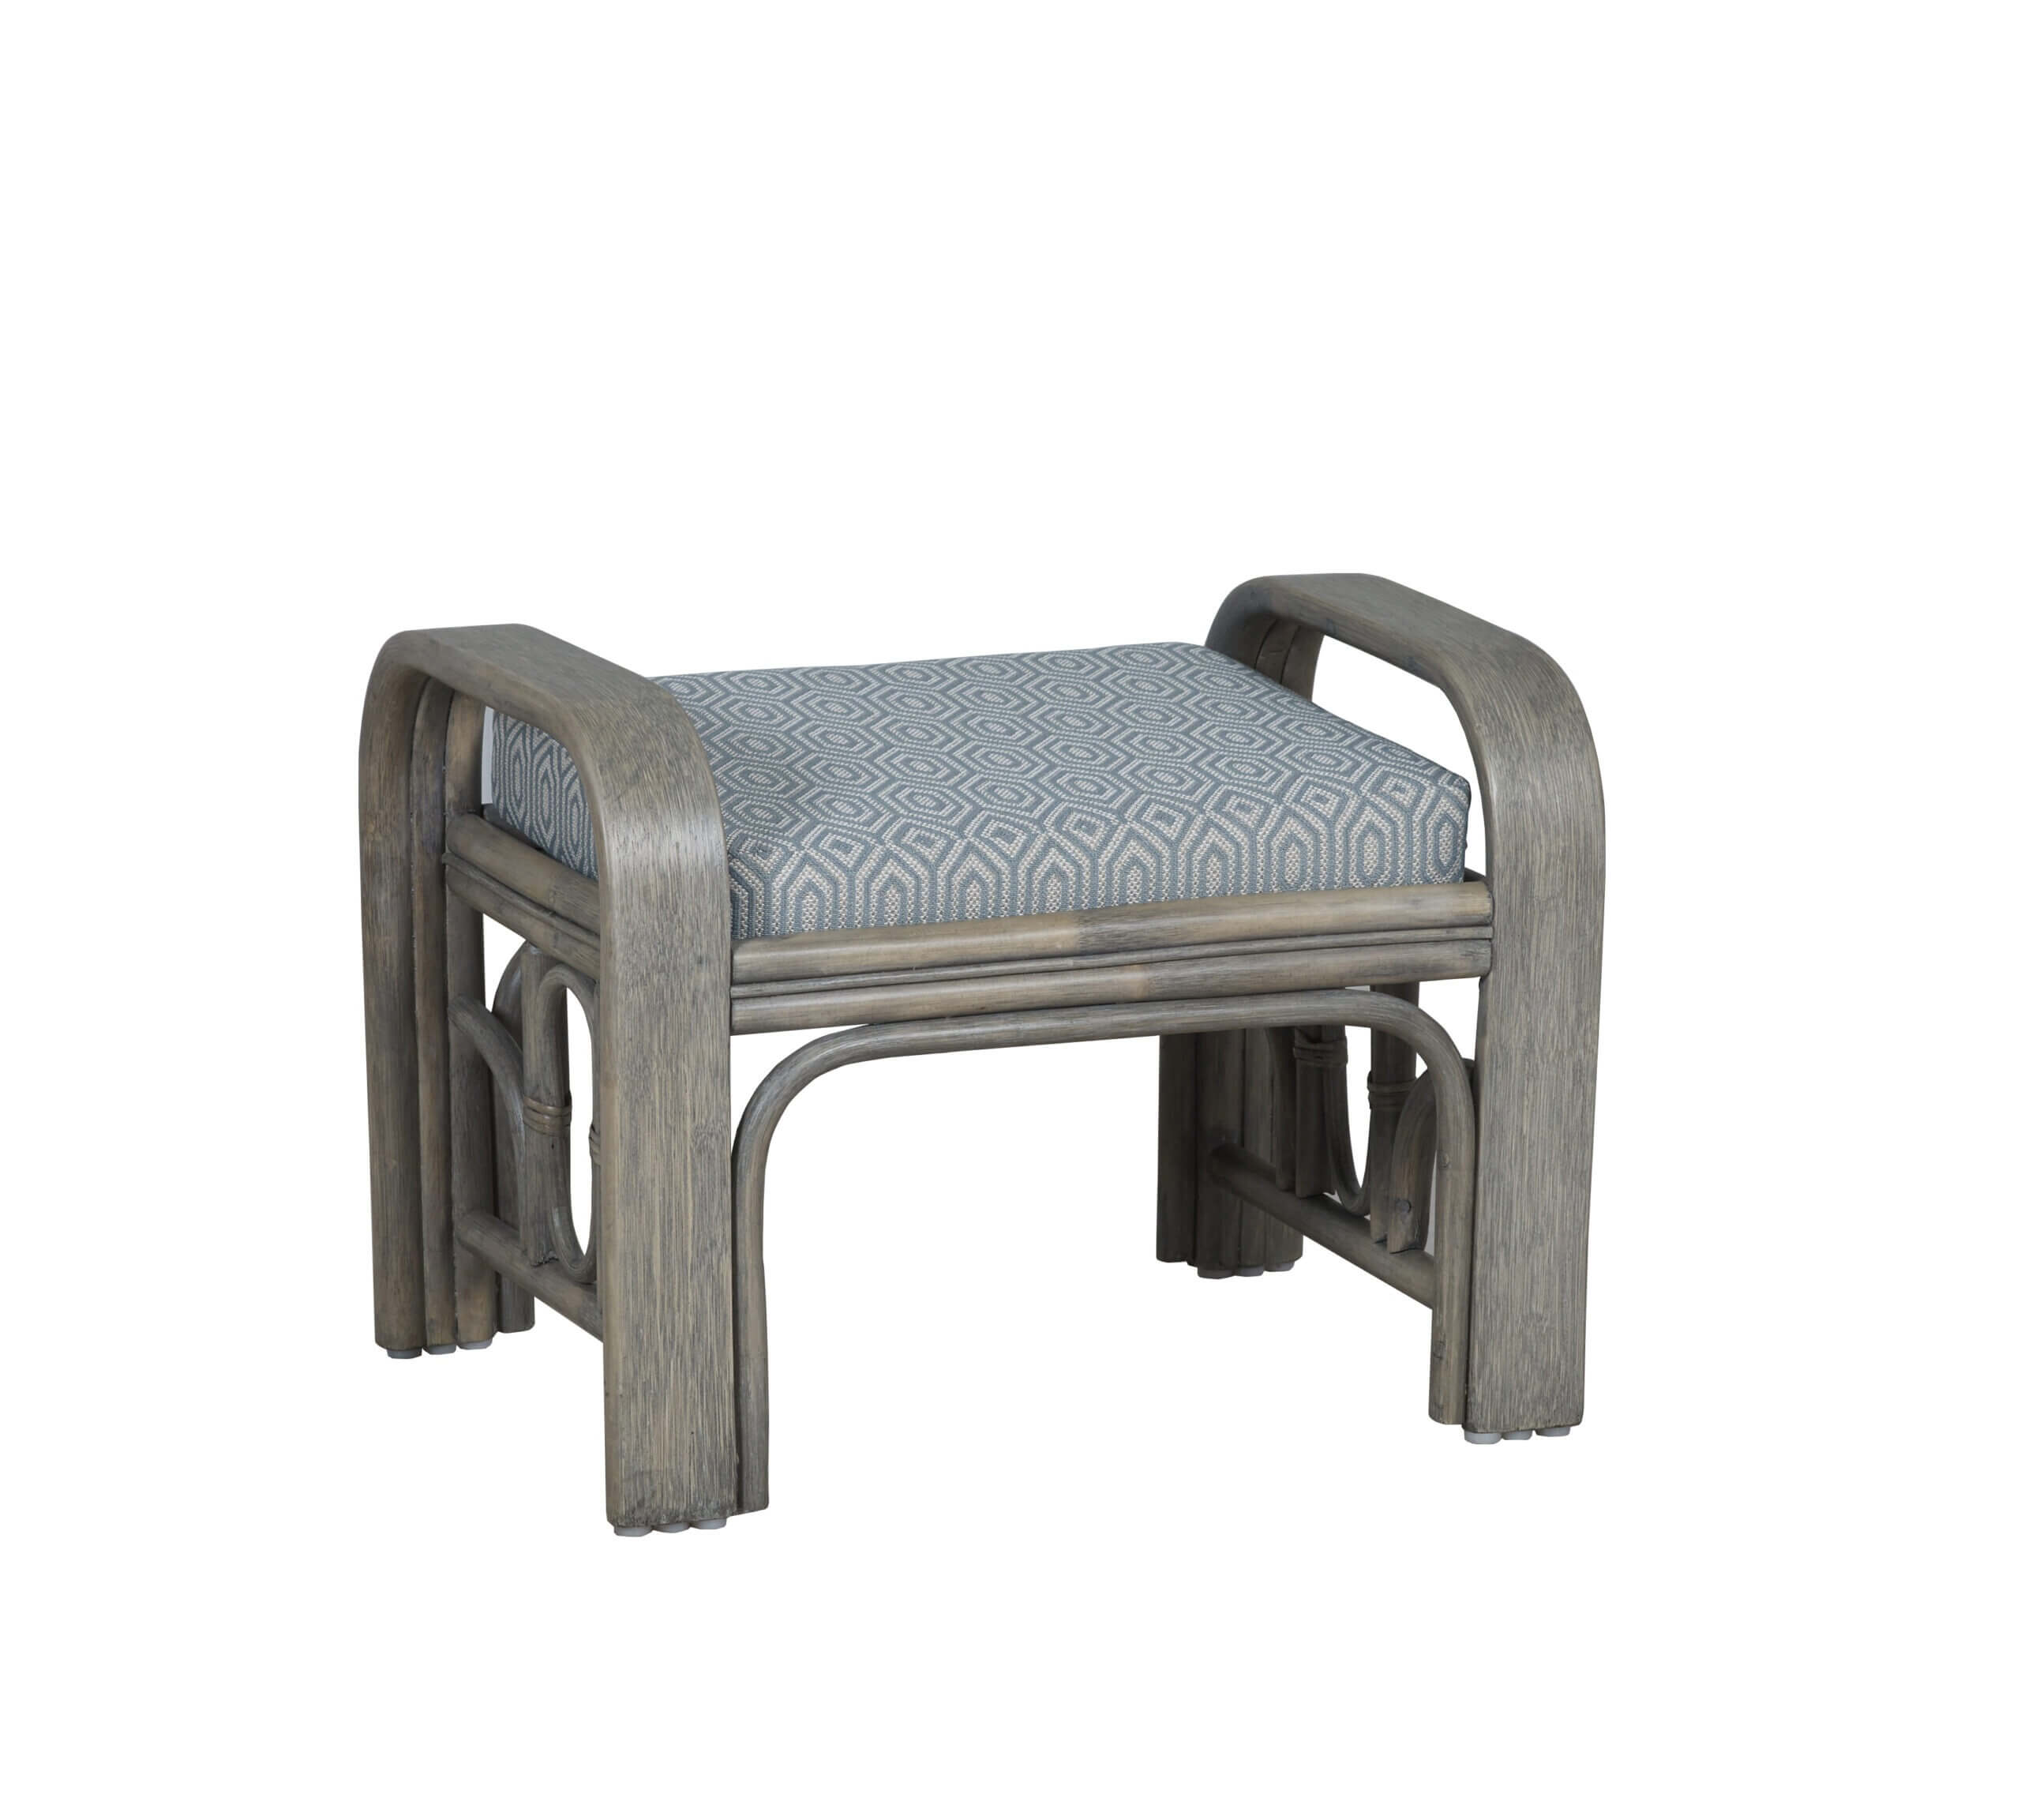 Showing image for Lupo footstool